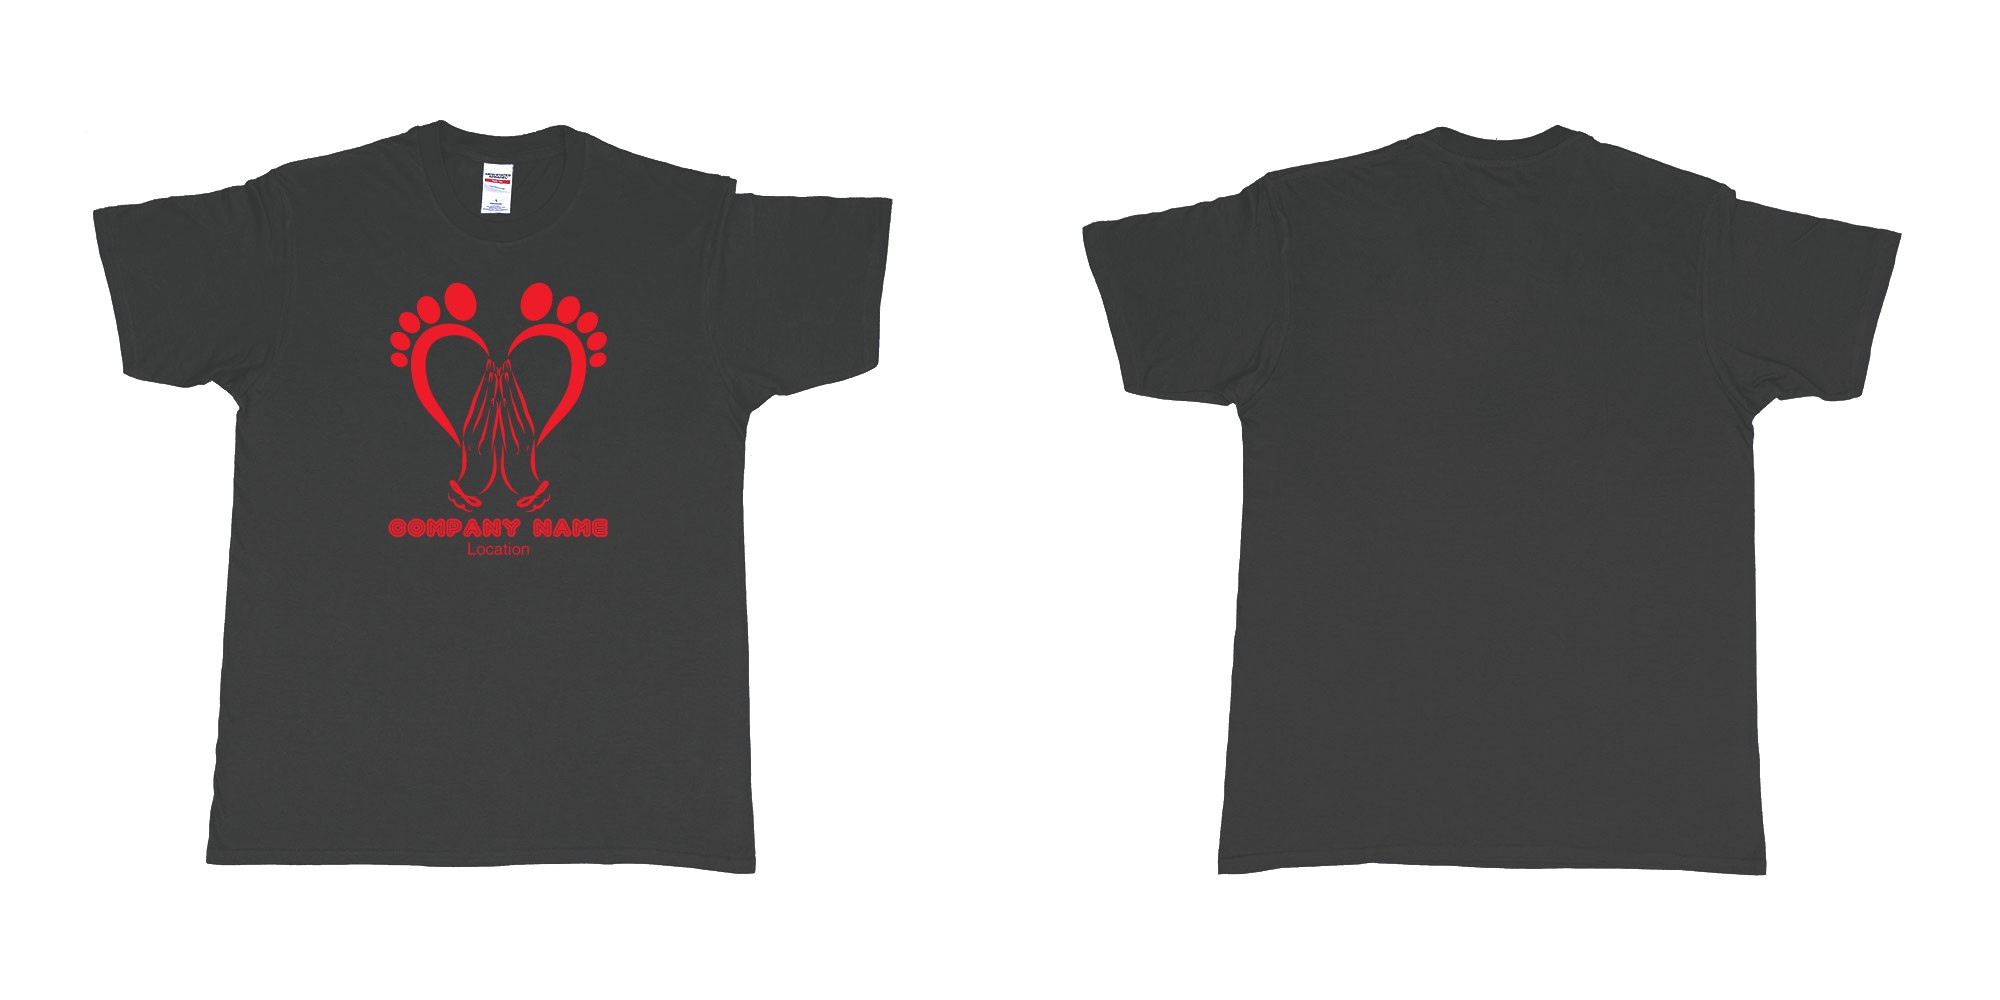 Custom tshirt design podiatrist chiropodist feet care specialist heart shaped feet with caring hands in fabric color black choice your own text made in Bali by The Pirate Way